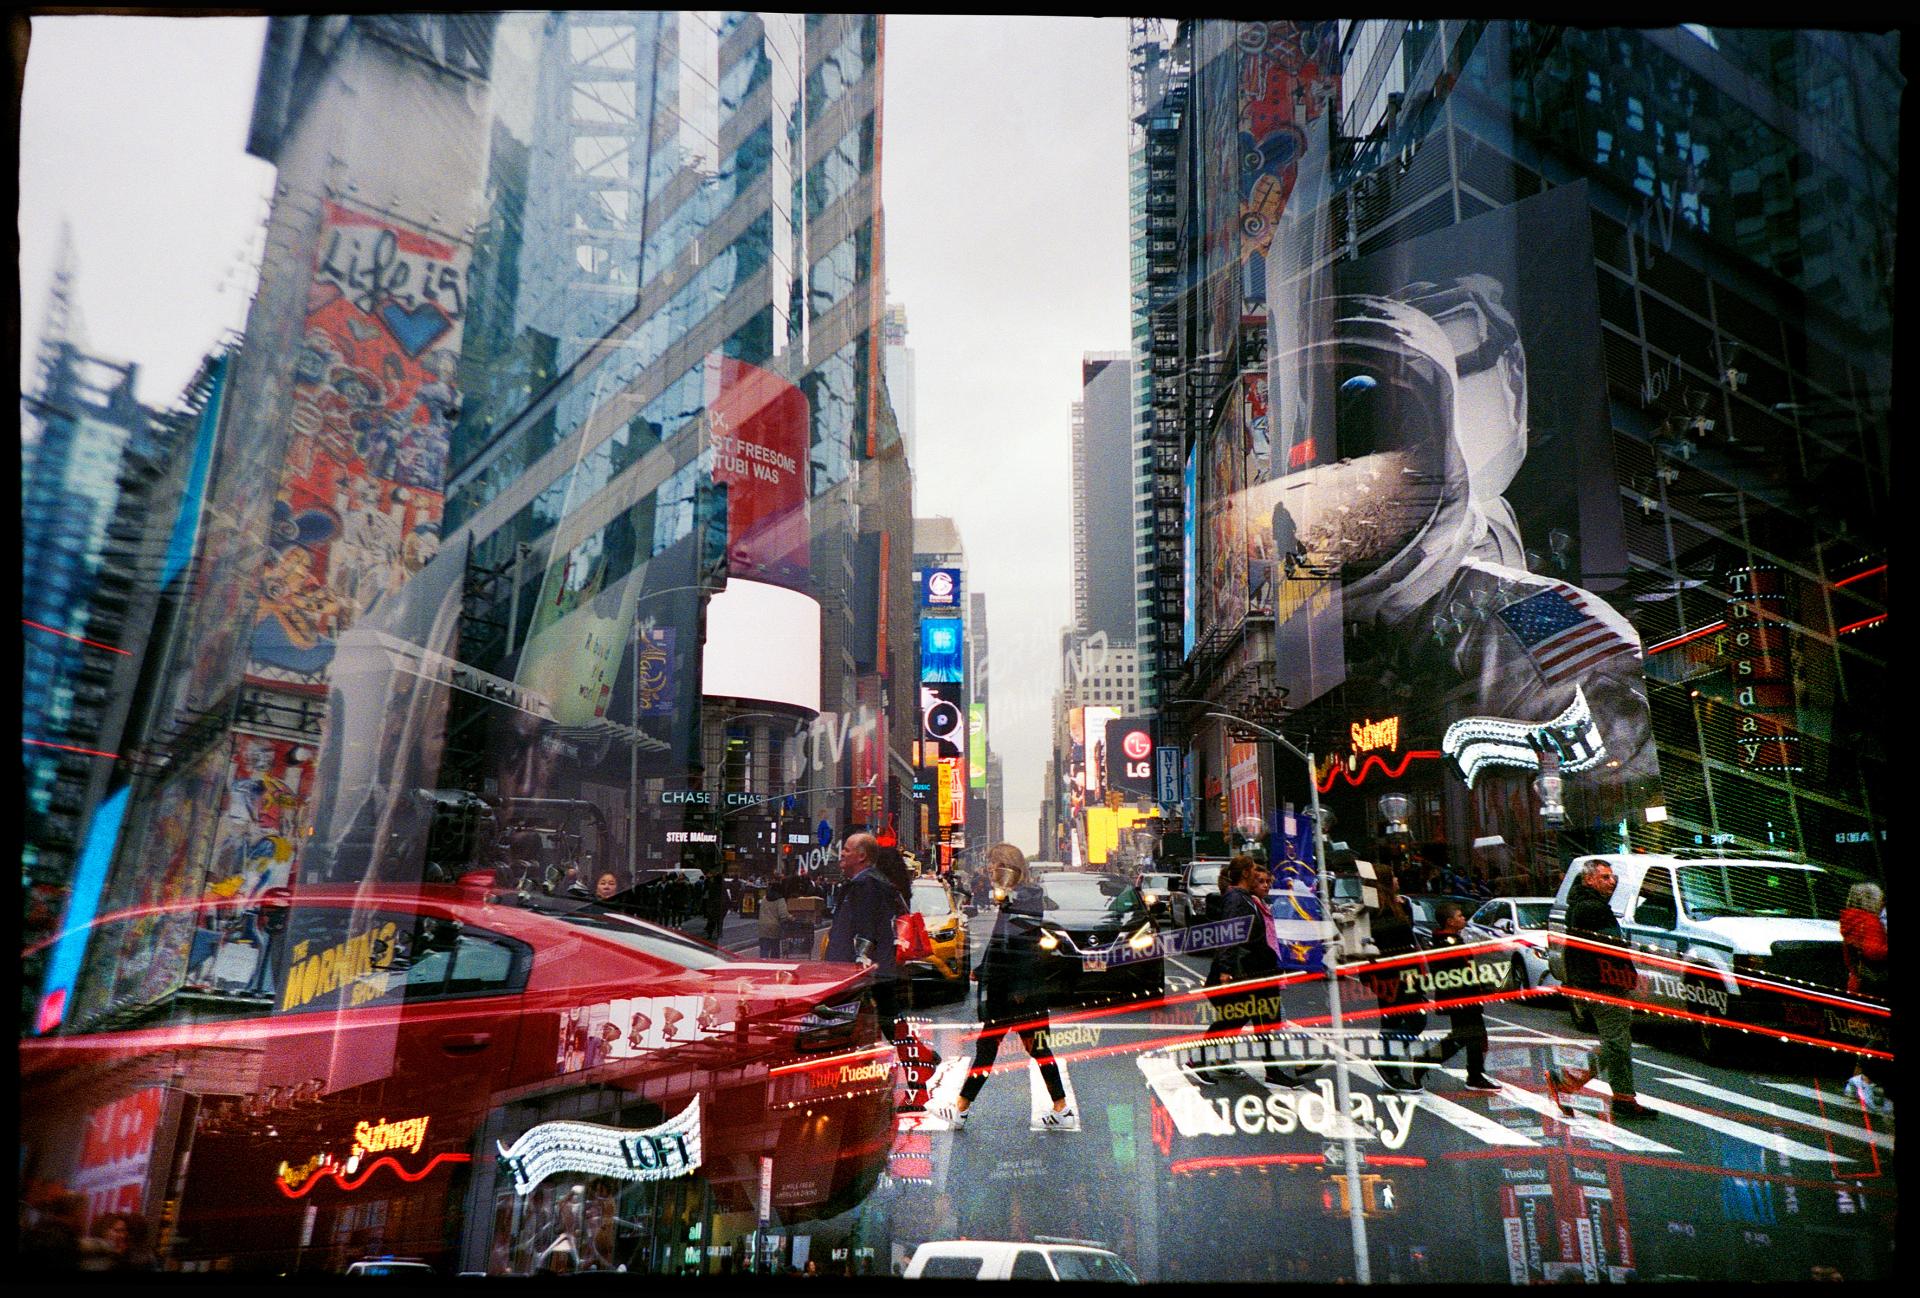 New York Photography Awards Winner - NEW YORKERS AND THEIR ENVIRONMENTS